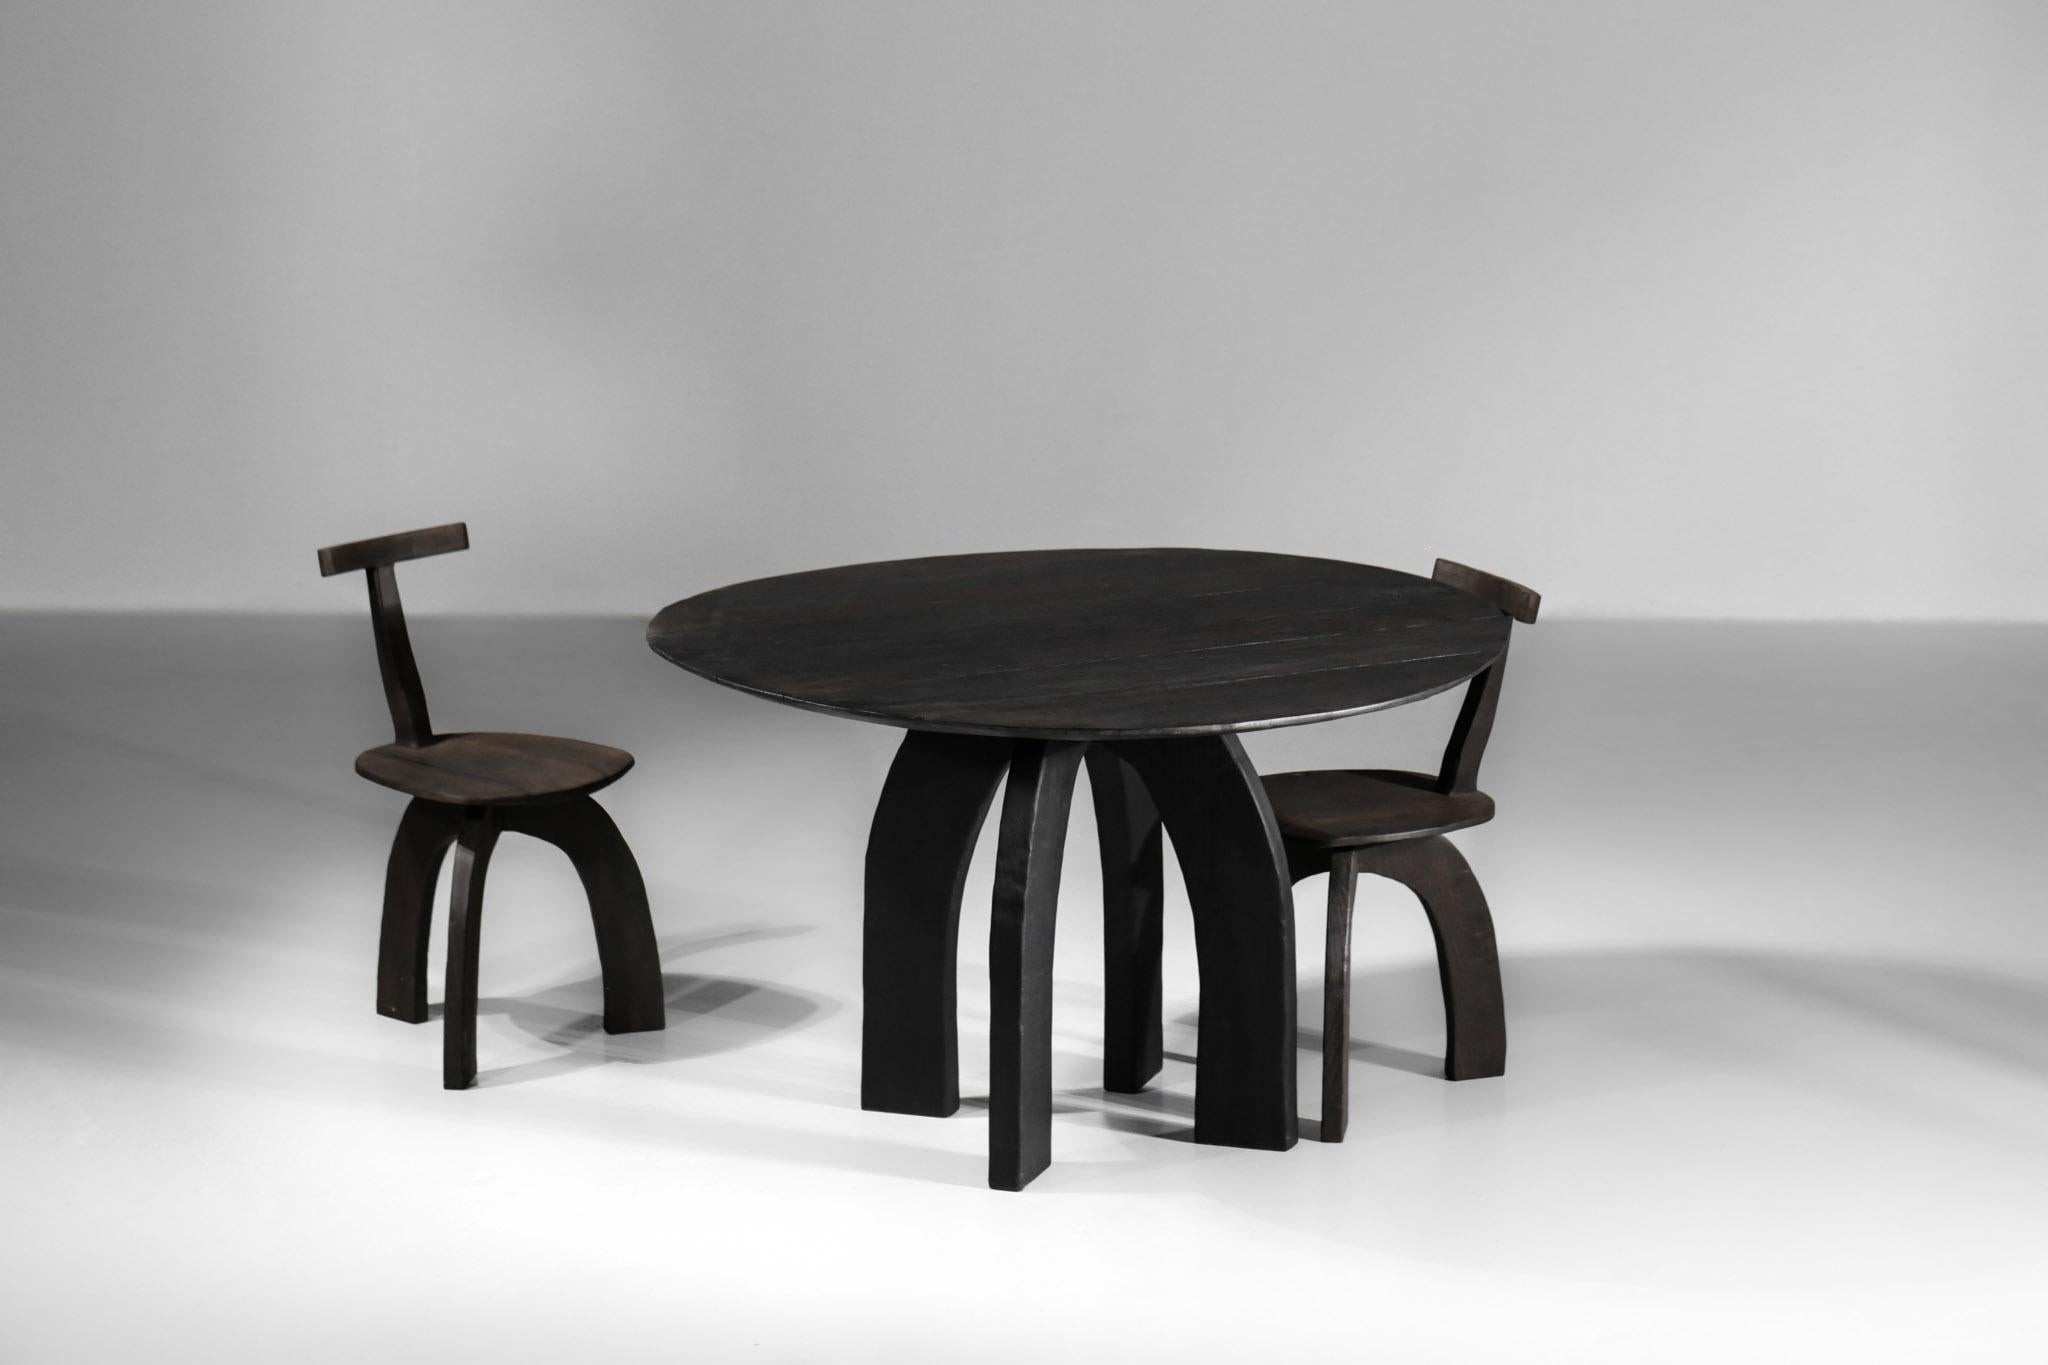 Burnished Artisanal Dining Set Round Table and Chairs by Vincent Vincent 80/20 Burnt Wood For Sale